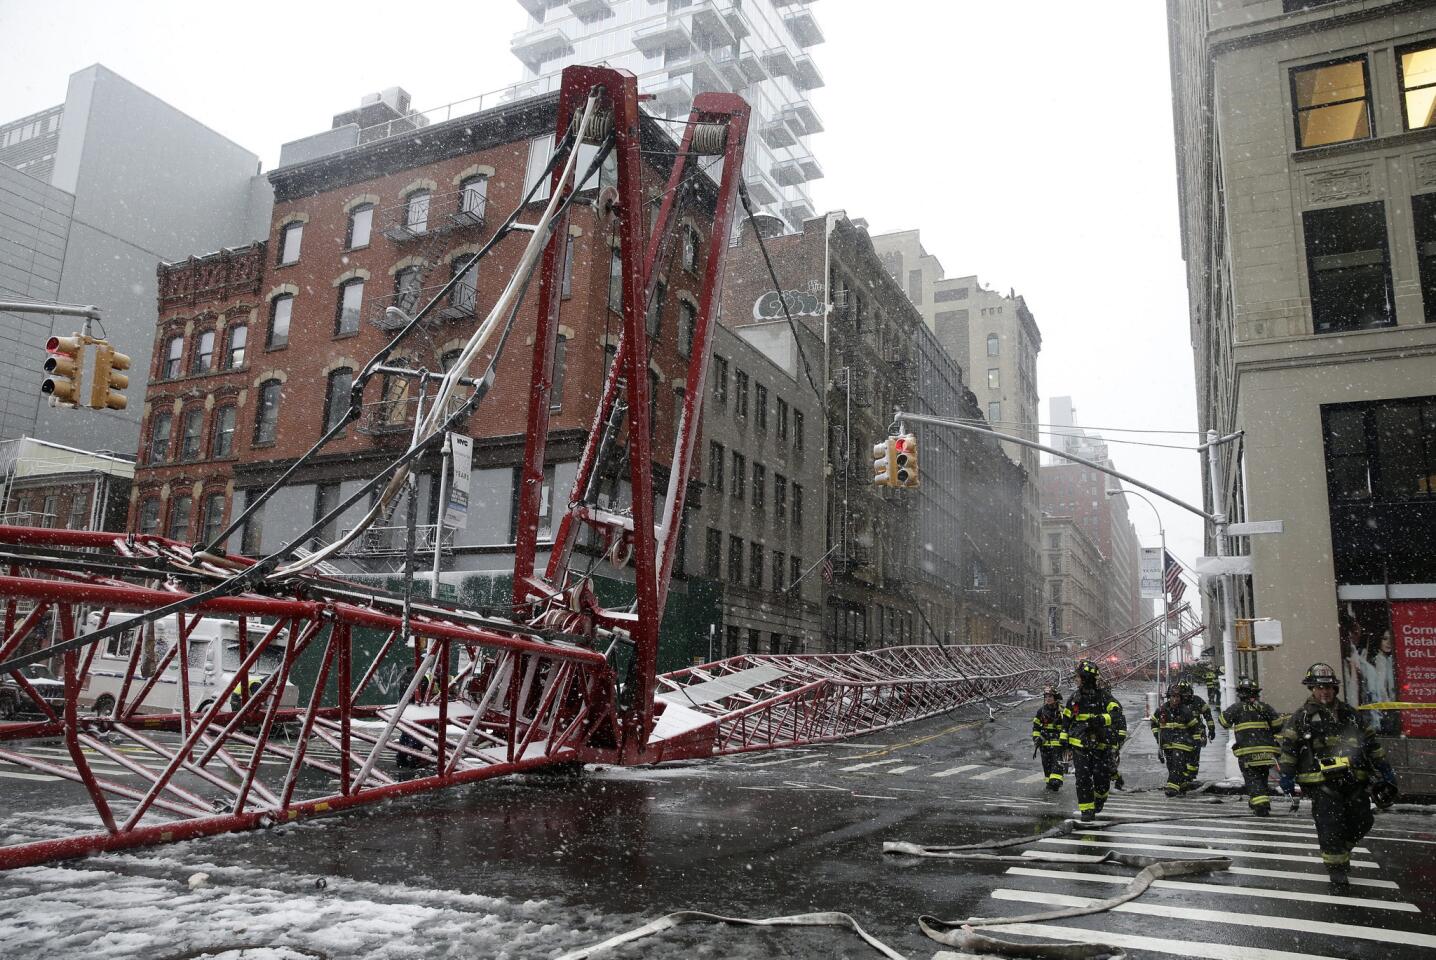 Members of the New York City Fire Department survey the damage of a fallen crane on 40 Worth Street in Lower Manhattan in New York City on Feb. 5, 2016. One person was killed and three others injured in the incident.